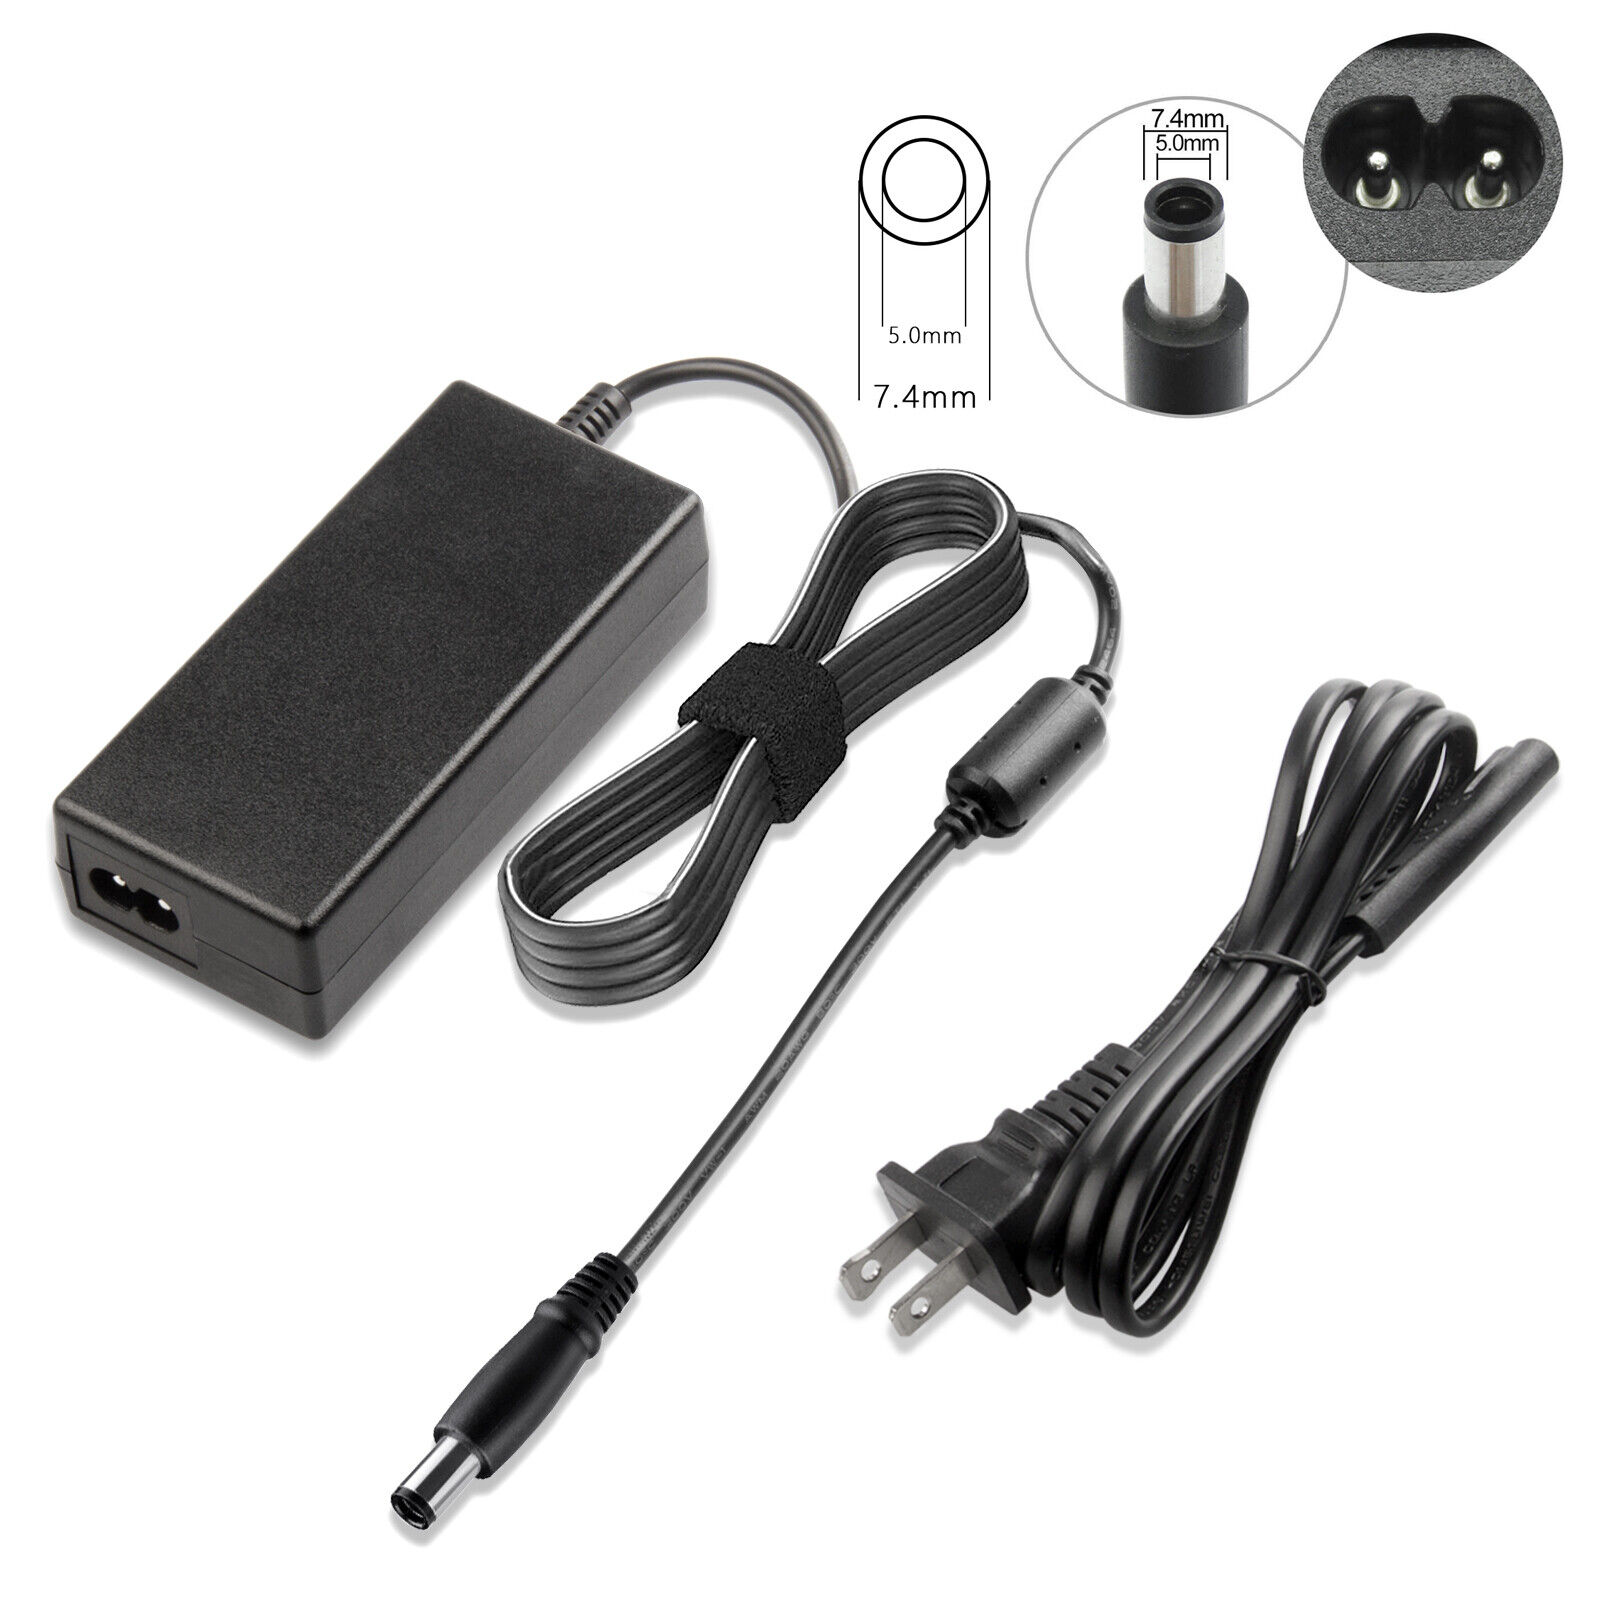 For HP EliteBook 2760p 6930p 8440p 8460p 8470p AC Power Charger Adapter 65W 3.5A